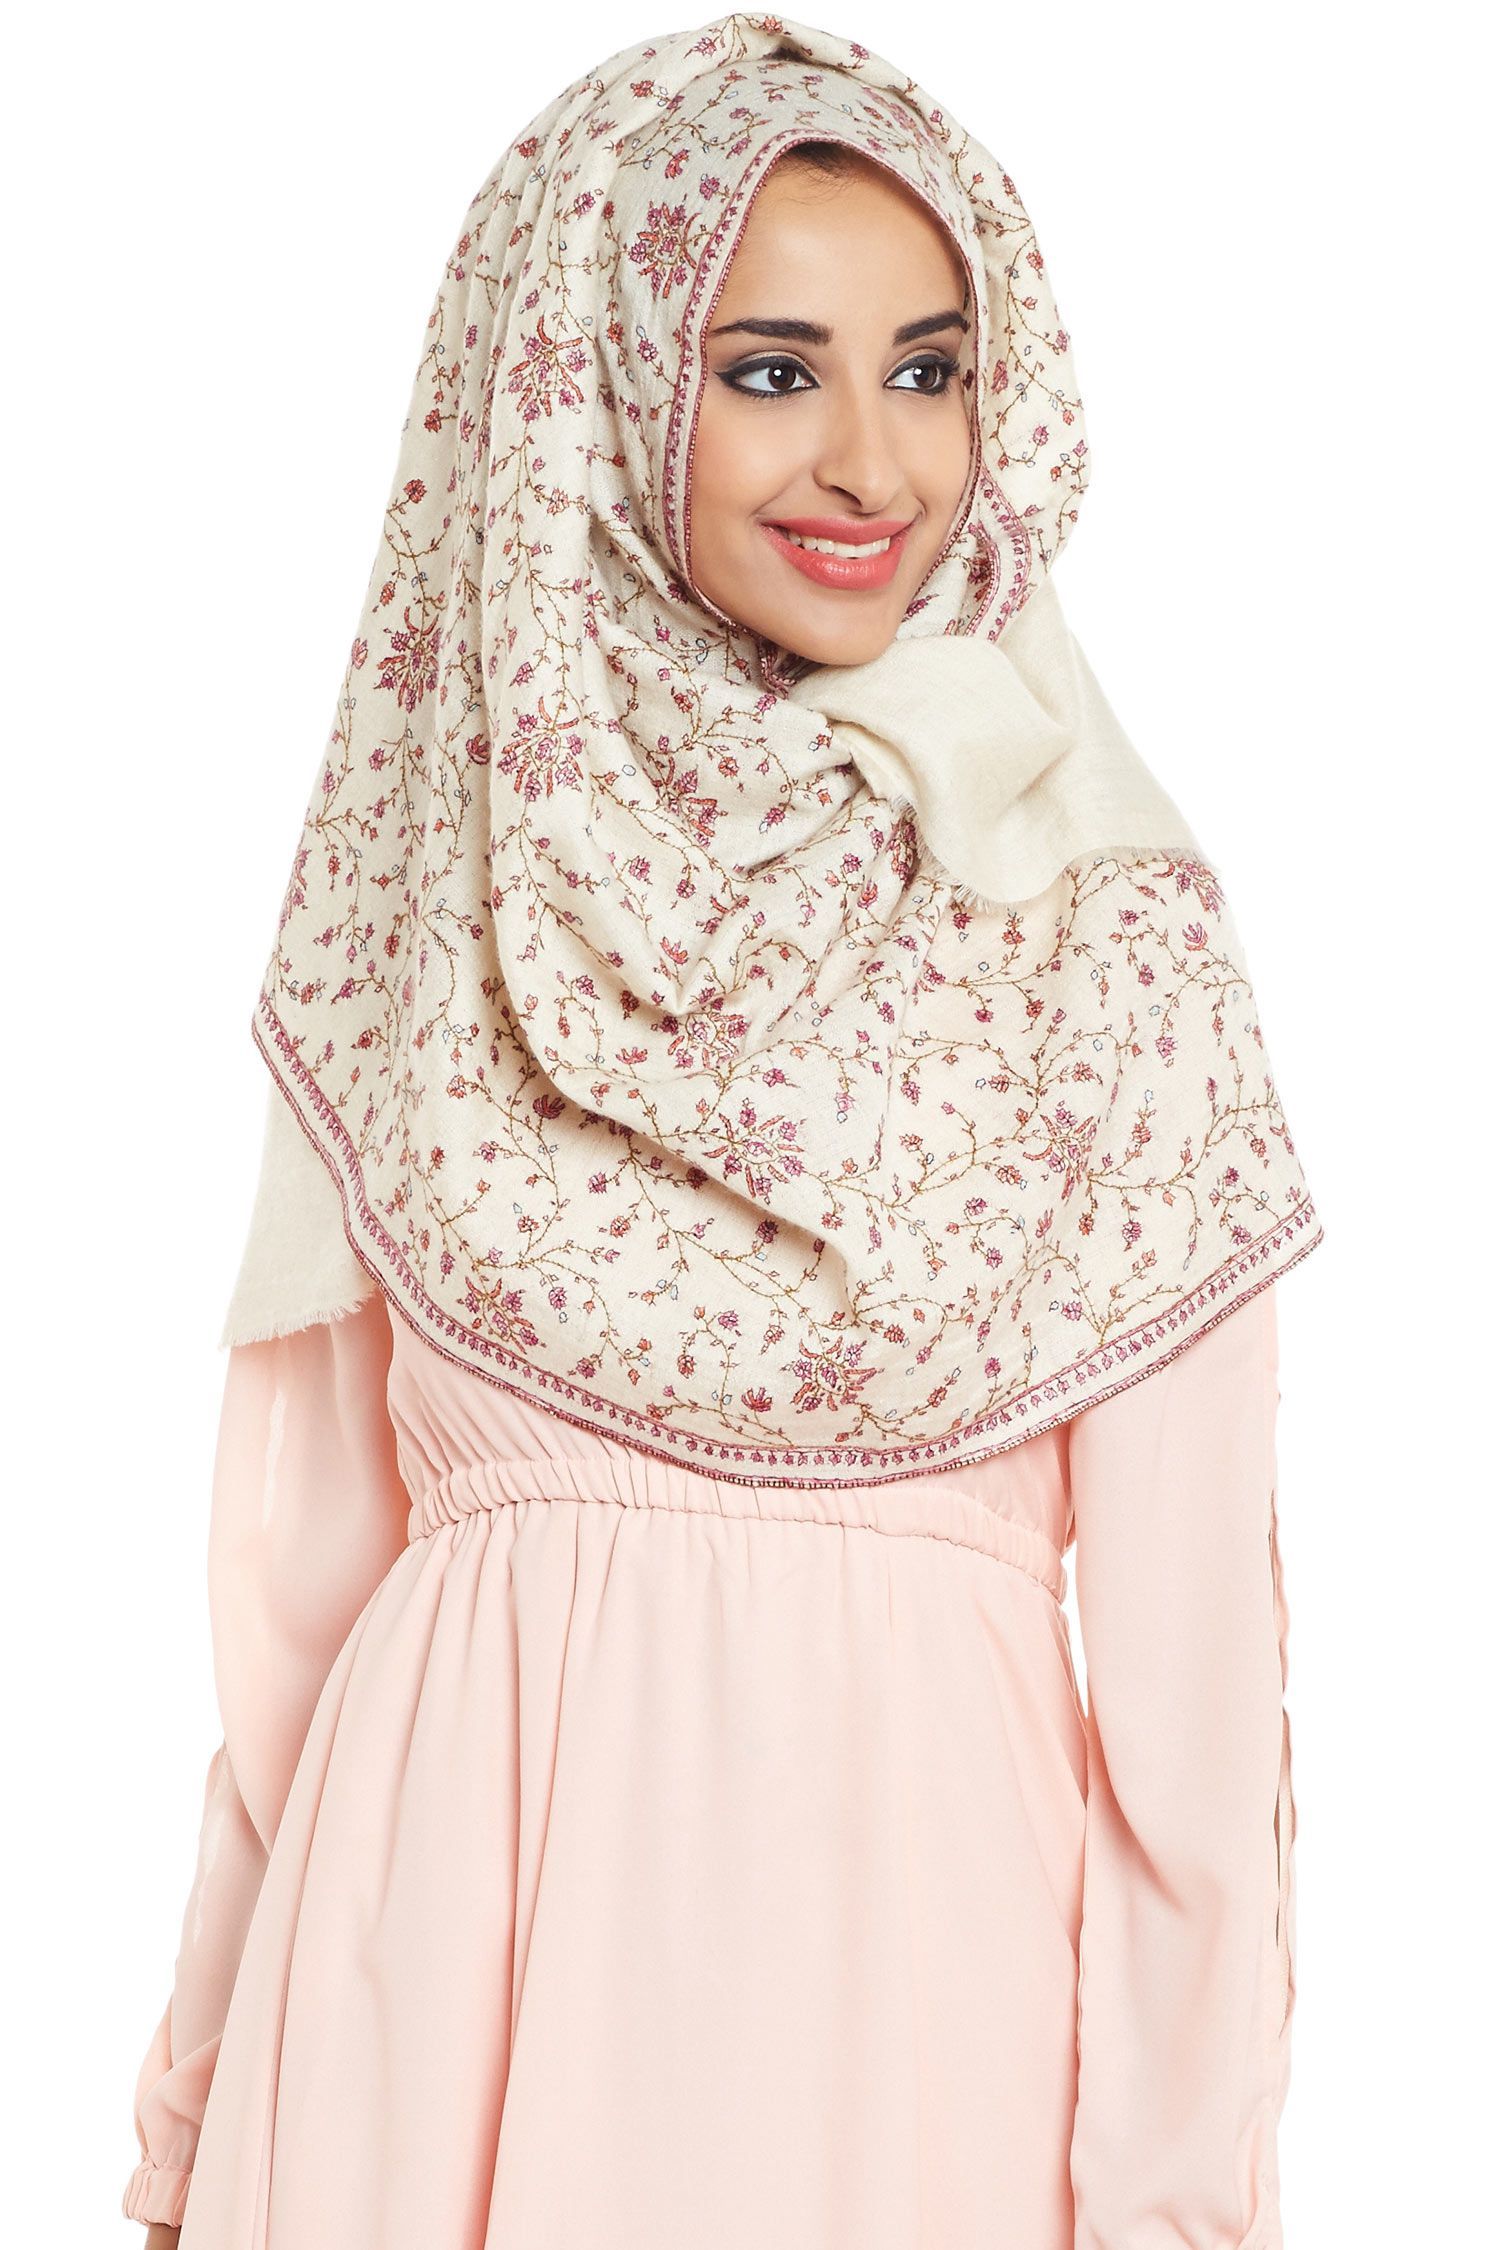 The Frosted Fire Garden Hijab